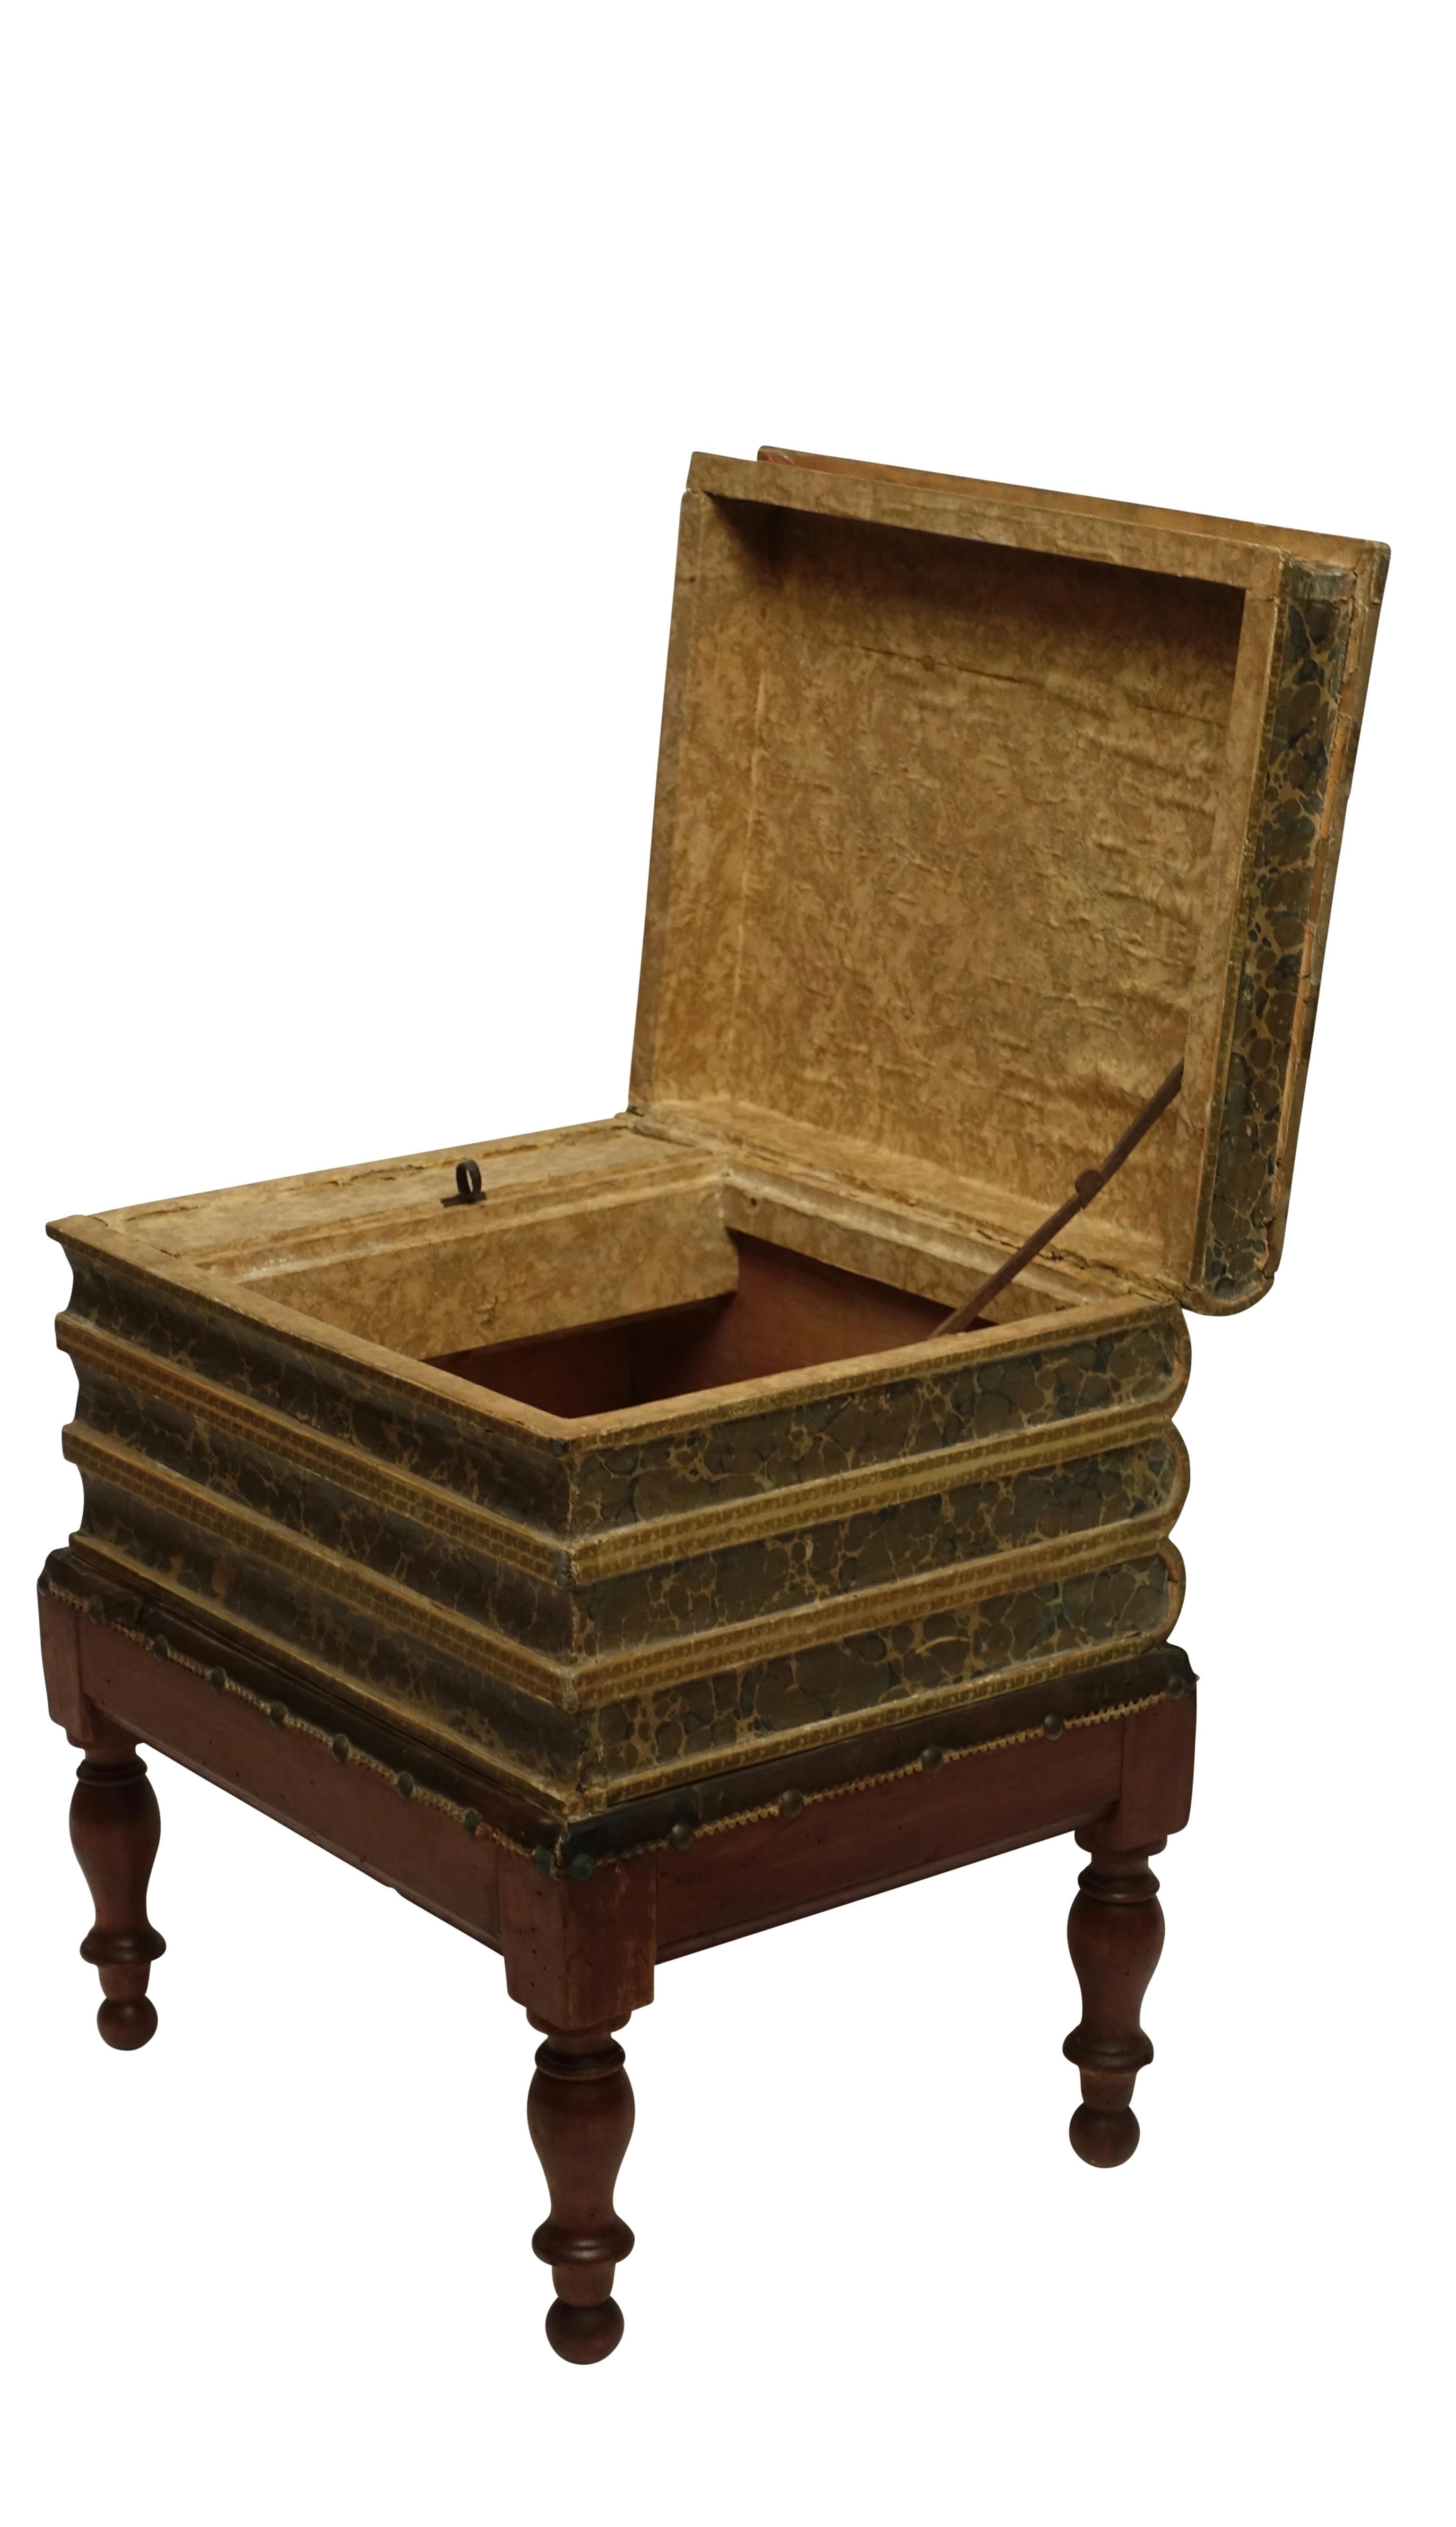 Regency Leather Faux Book Box on Painted Stand or End Table, English, circa 1830 For Sale 3